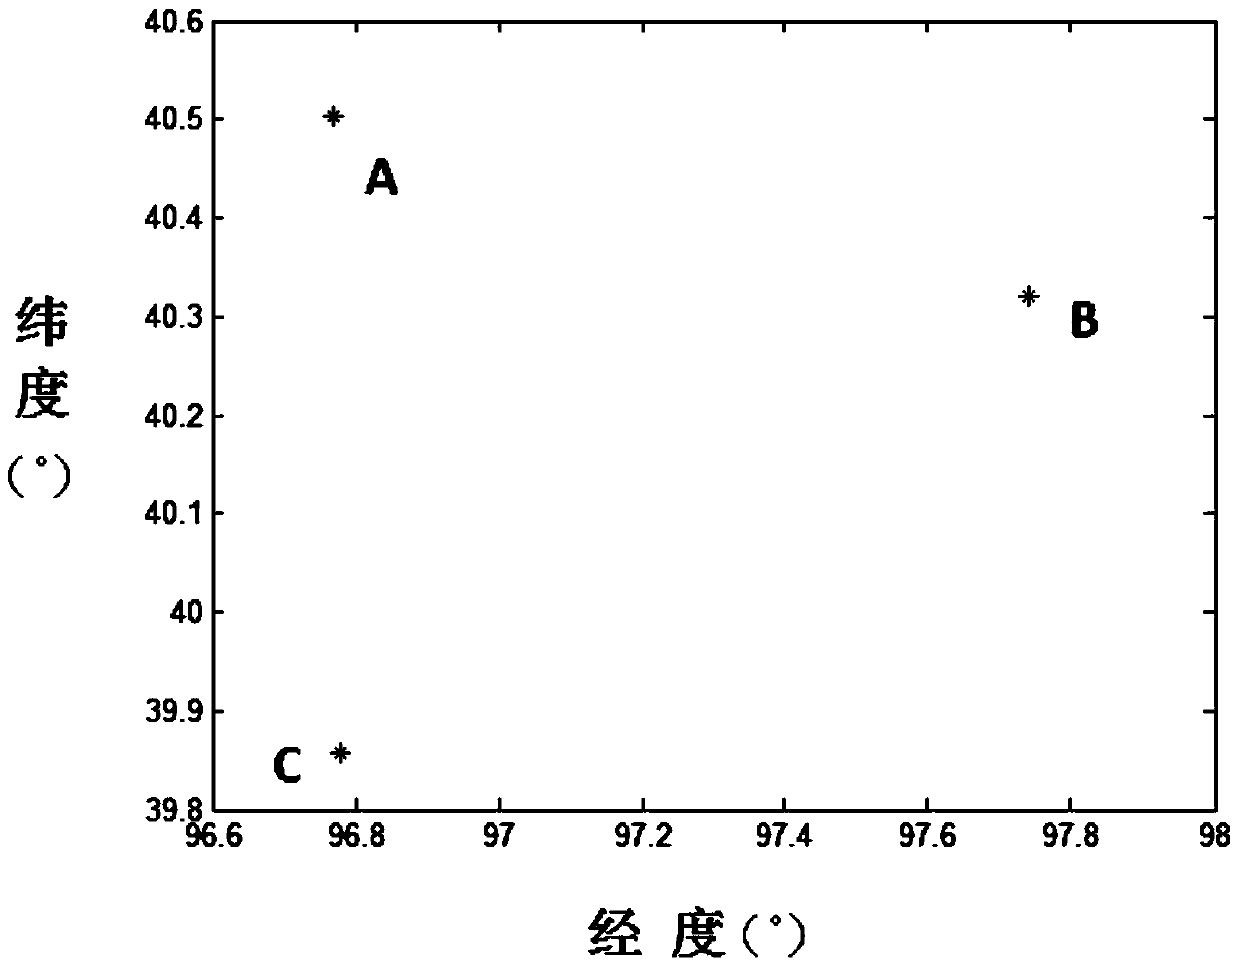 A Single-Epoch Determination Method for Integer Ambiguity of Beidou System Reference Stations